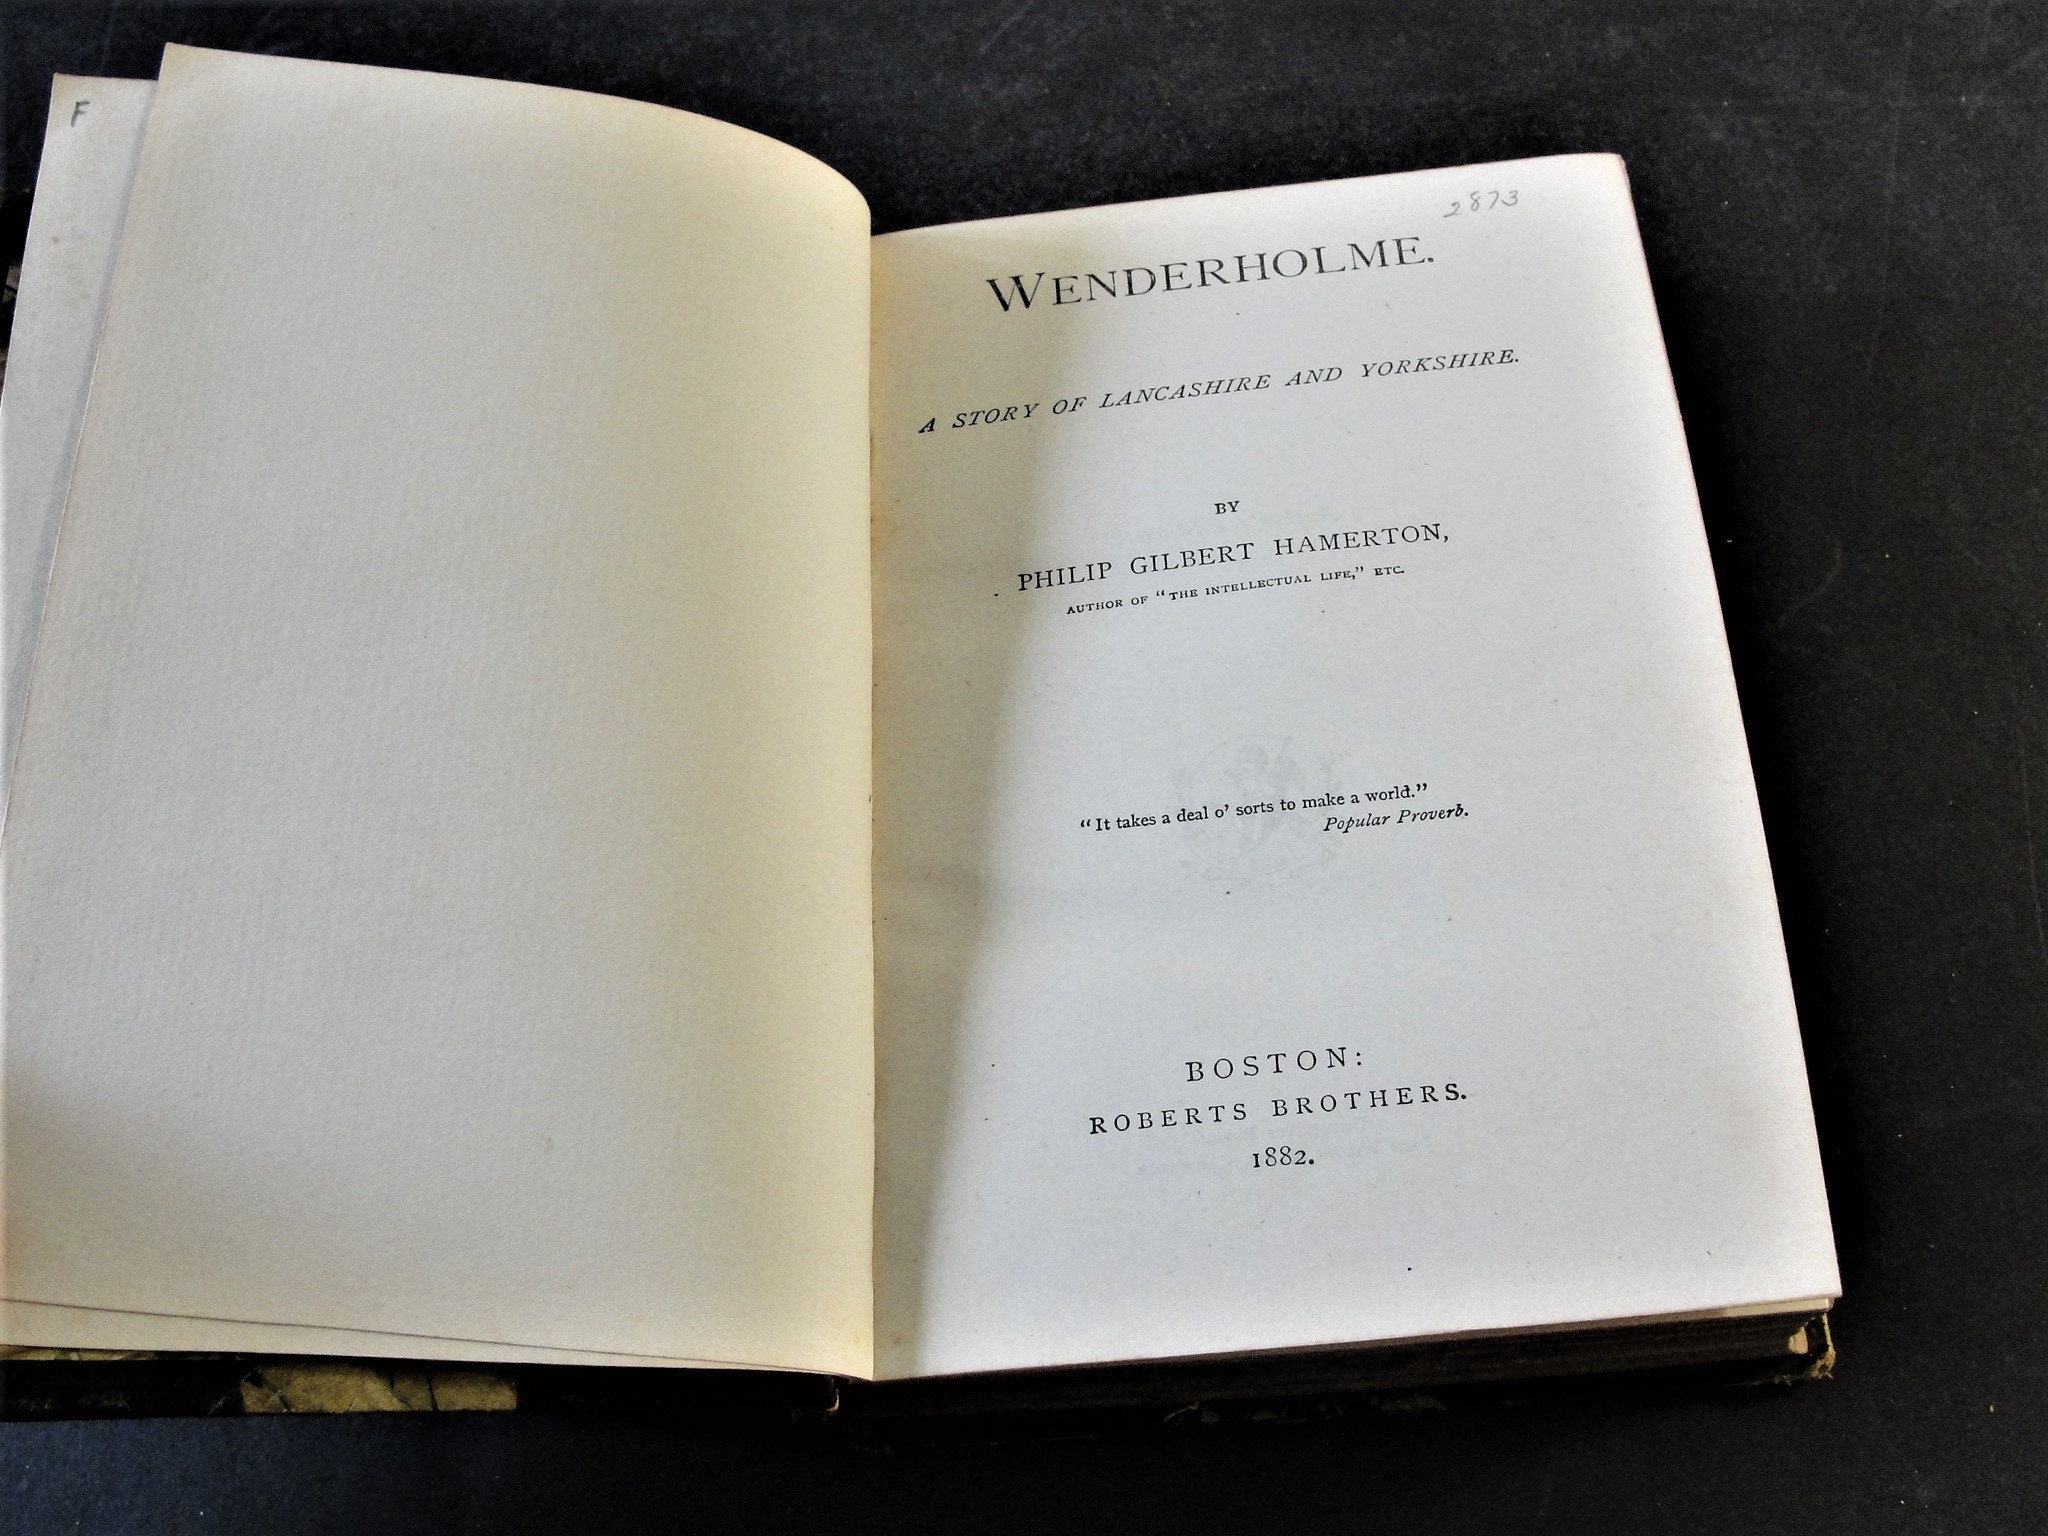 Wenderholme. A Story of Lancashire and Yorkshire by Philip - Etsy